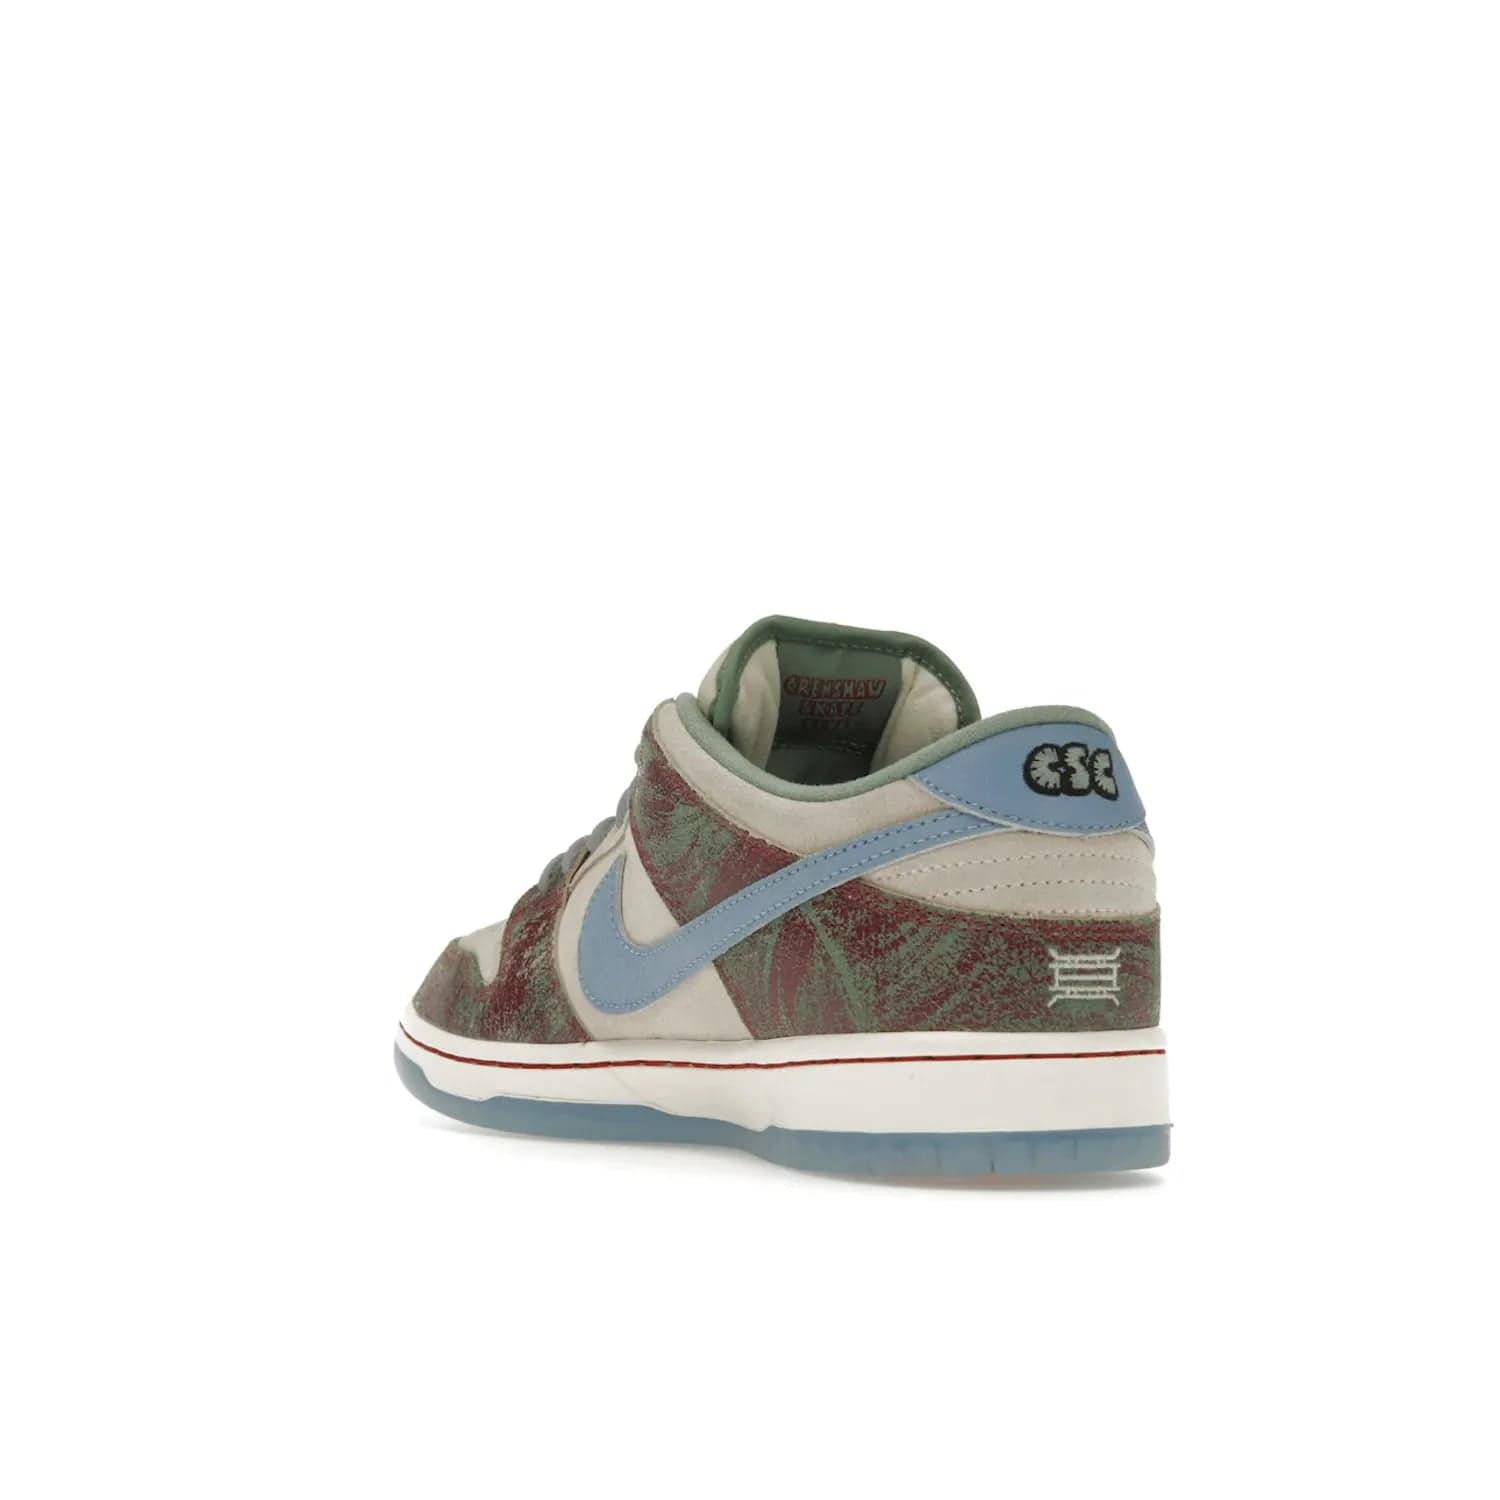 Nike SB Dunk Low Crenshaw Skate Club - Image 25 - Only at www.BallersClubKickz.com - Introducing the Nike SB Dunk Low Crenshaw Skate Club! Classic skate shoes with Sail and Light Blue upper, Cedar accents, padded collars and superior grip for comfortable, stable performance and style. Ideal for any skate session.